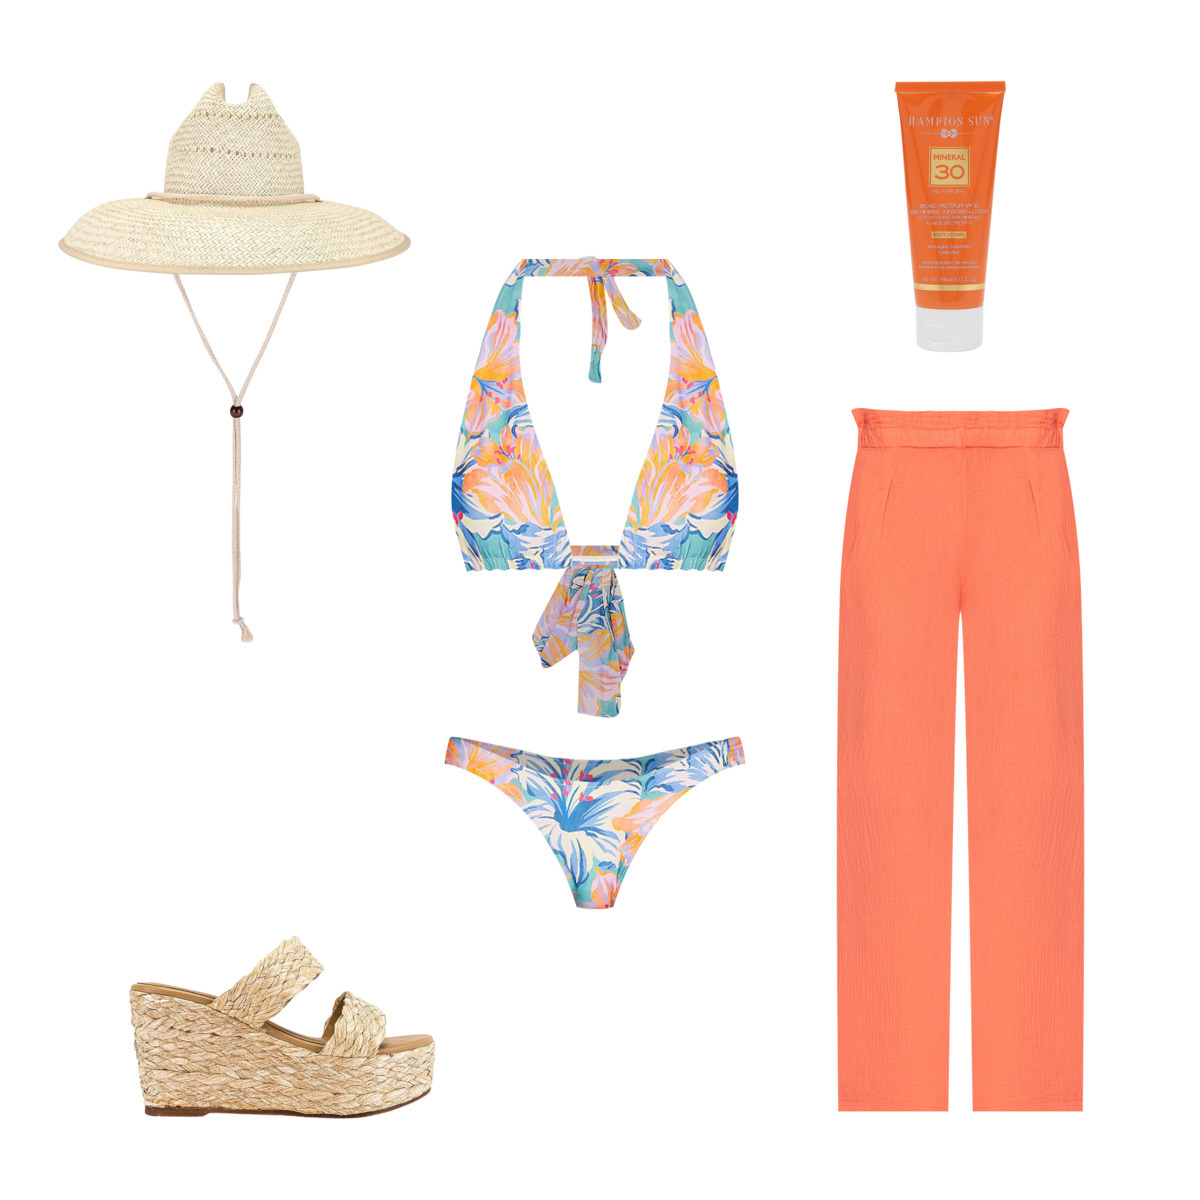 Revolve outfit featuring orange and blue floral bikini, orange paper bag pants, straw espadrilles, and a straw hat. Outfit powered by Stylitics for Shoptalk style guide. 